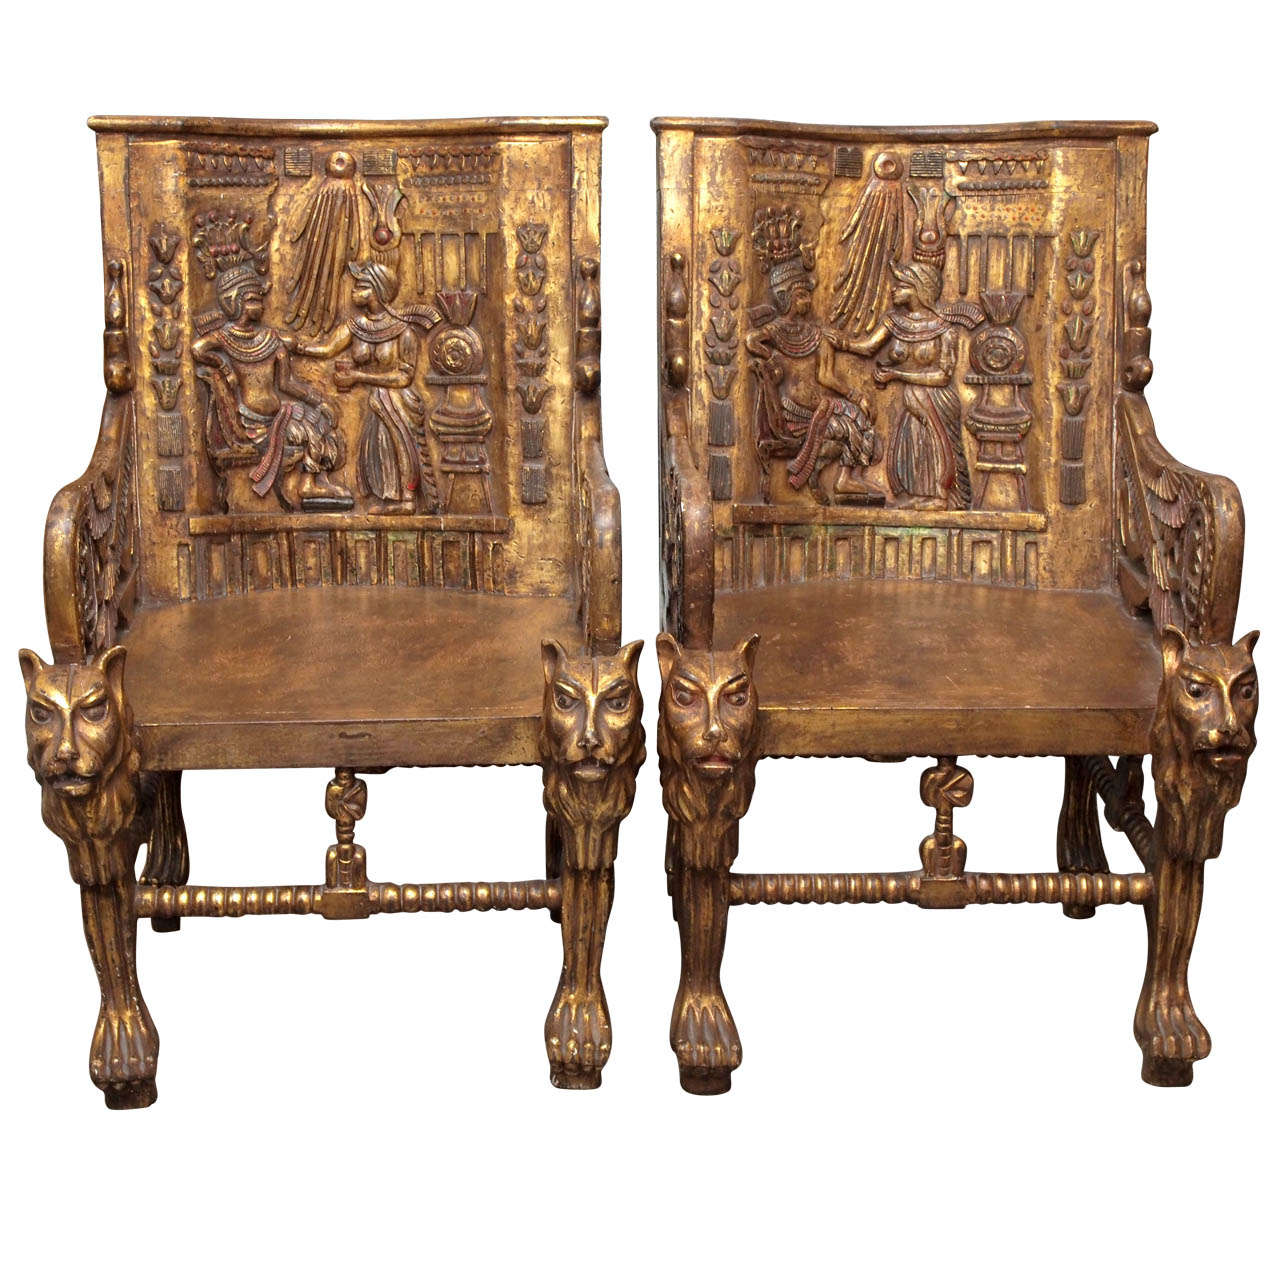 Pair of Egyptian Revival Giltwood Throne Chairs